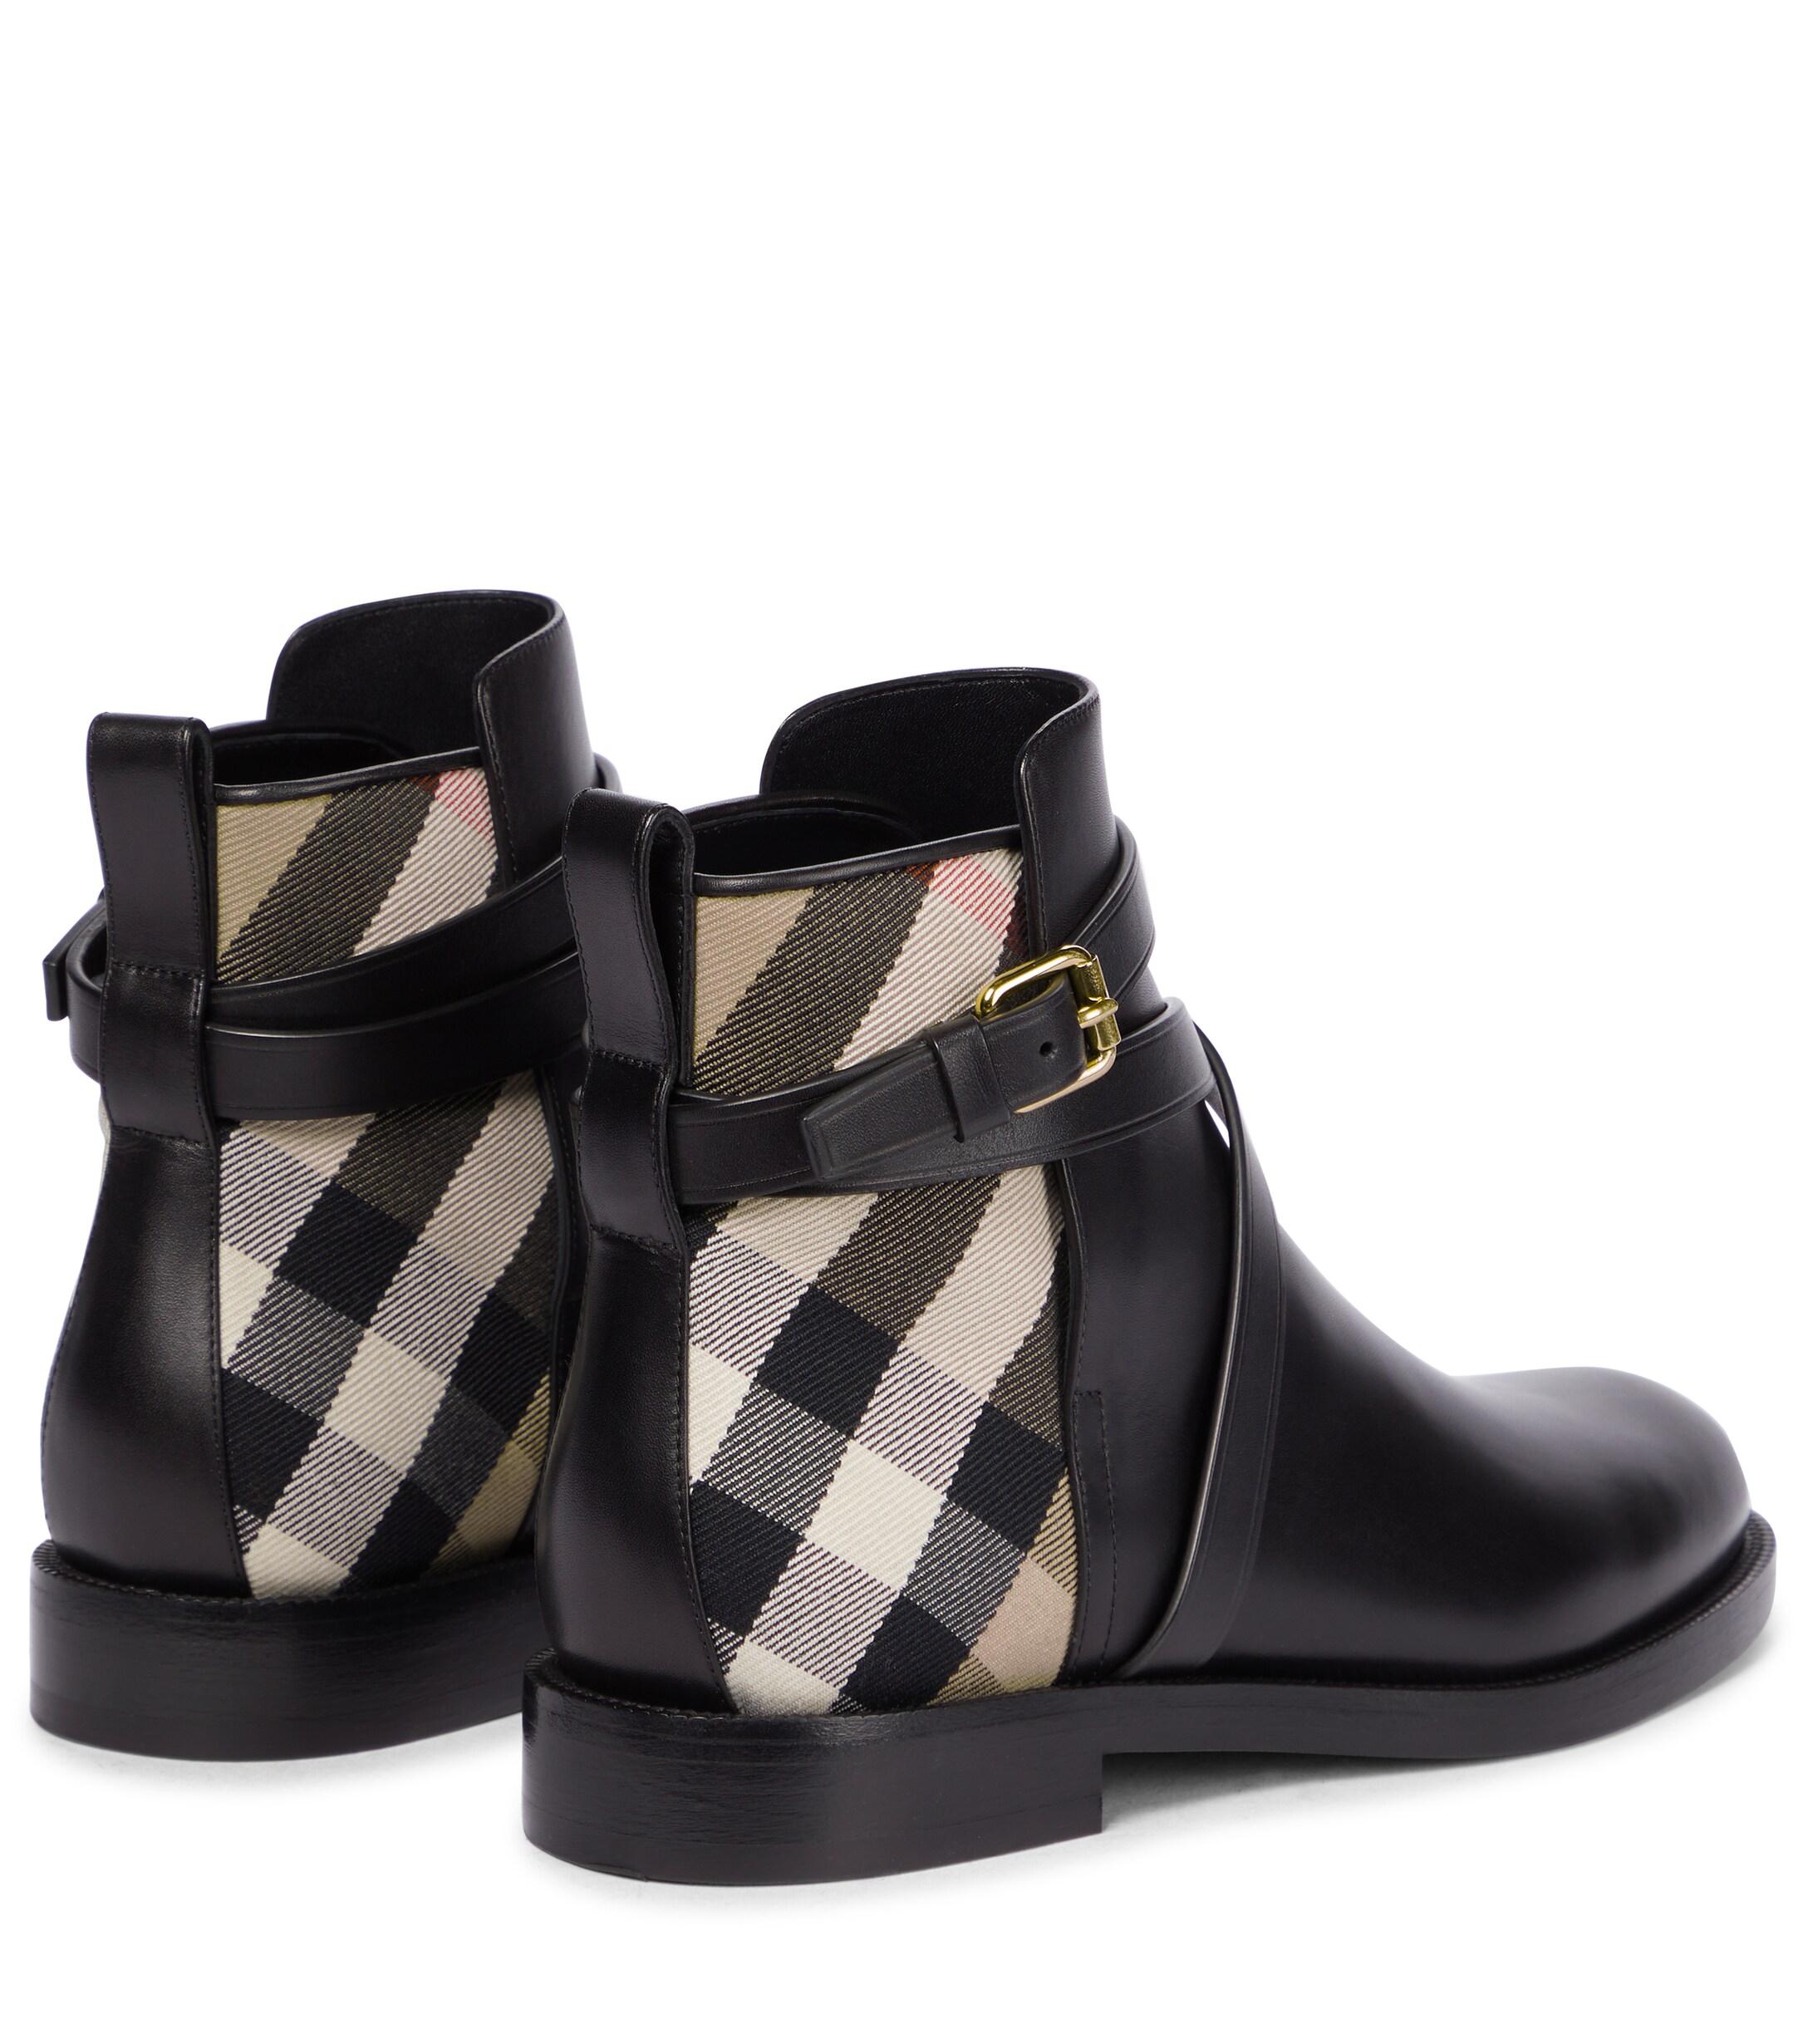 Burberry Archive Check Leather Ankle Boots in Black - Lyst